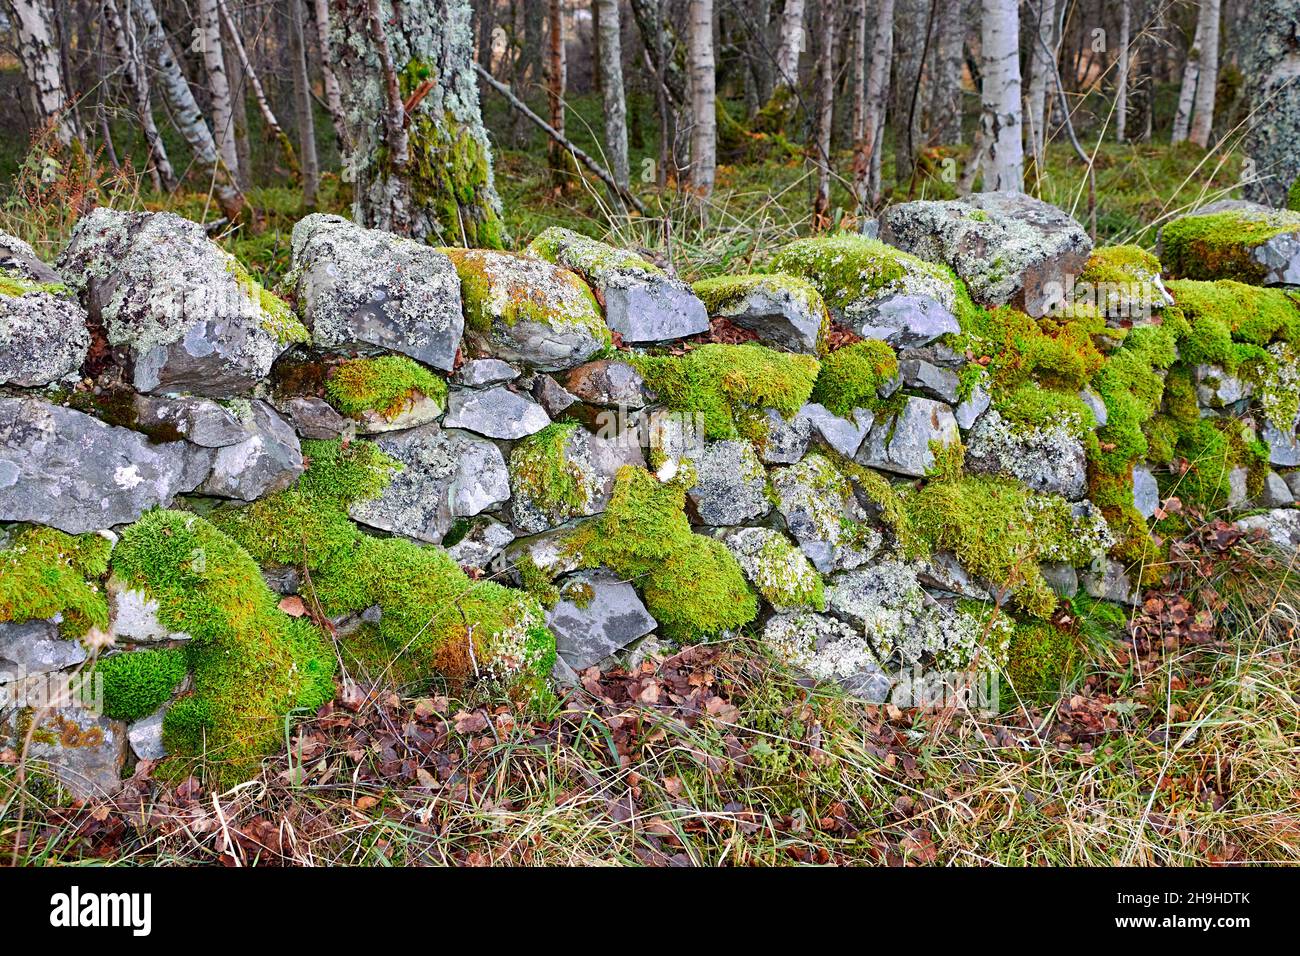 GROWTH OF MOSS Bryophyta GROWING ON LICHEN COVERED STONES IN A WALL Stock Photo